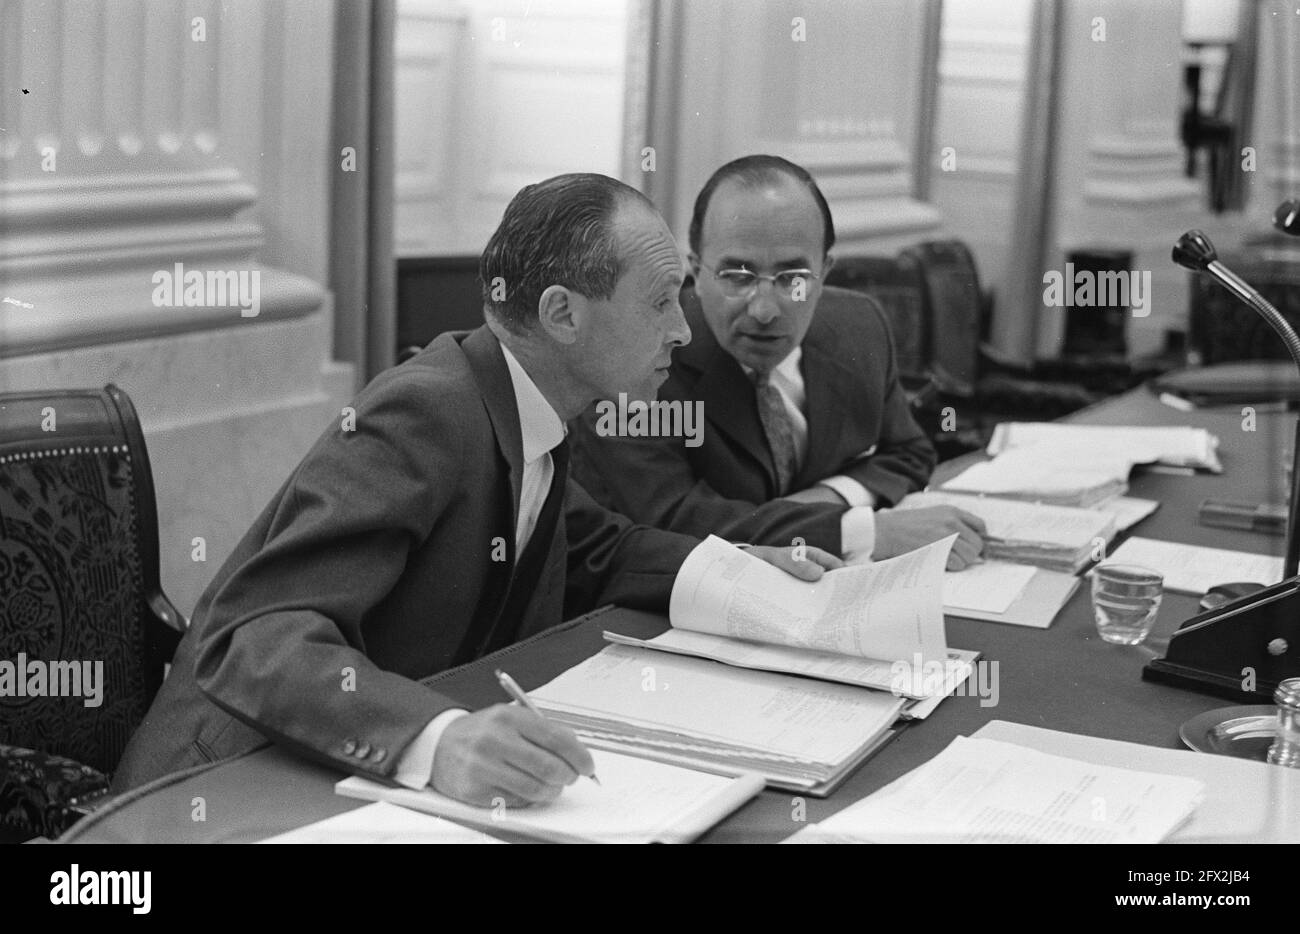 Mammoth Act of the Lower House (Minister Cals and Mr. J.G.M. Broekman), June 19, 1962, The Netherlands, 20th century press agency photo, news to remember, documentary, historic photography 1945-1990, visual stories, human history of the Twentieth Century, capturing moments in time Stock Photo